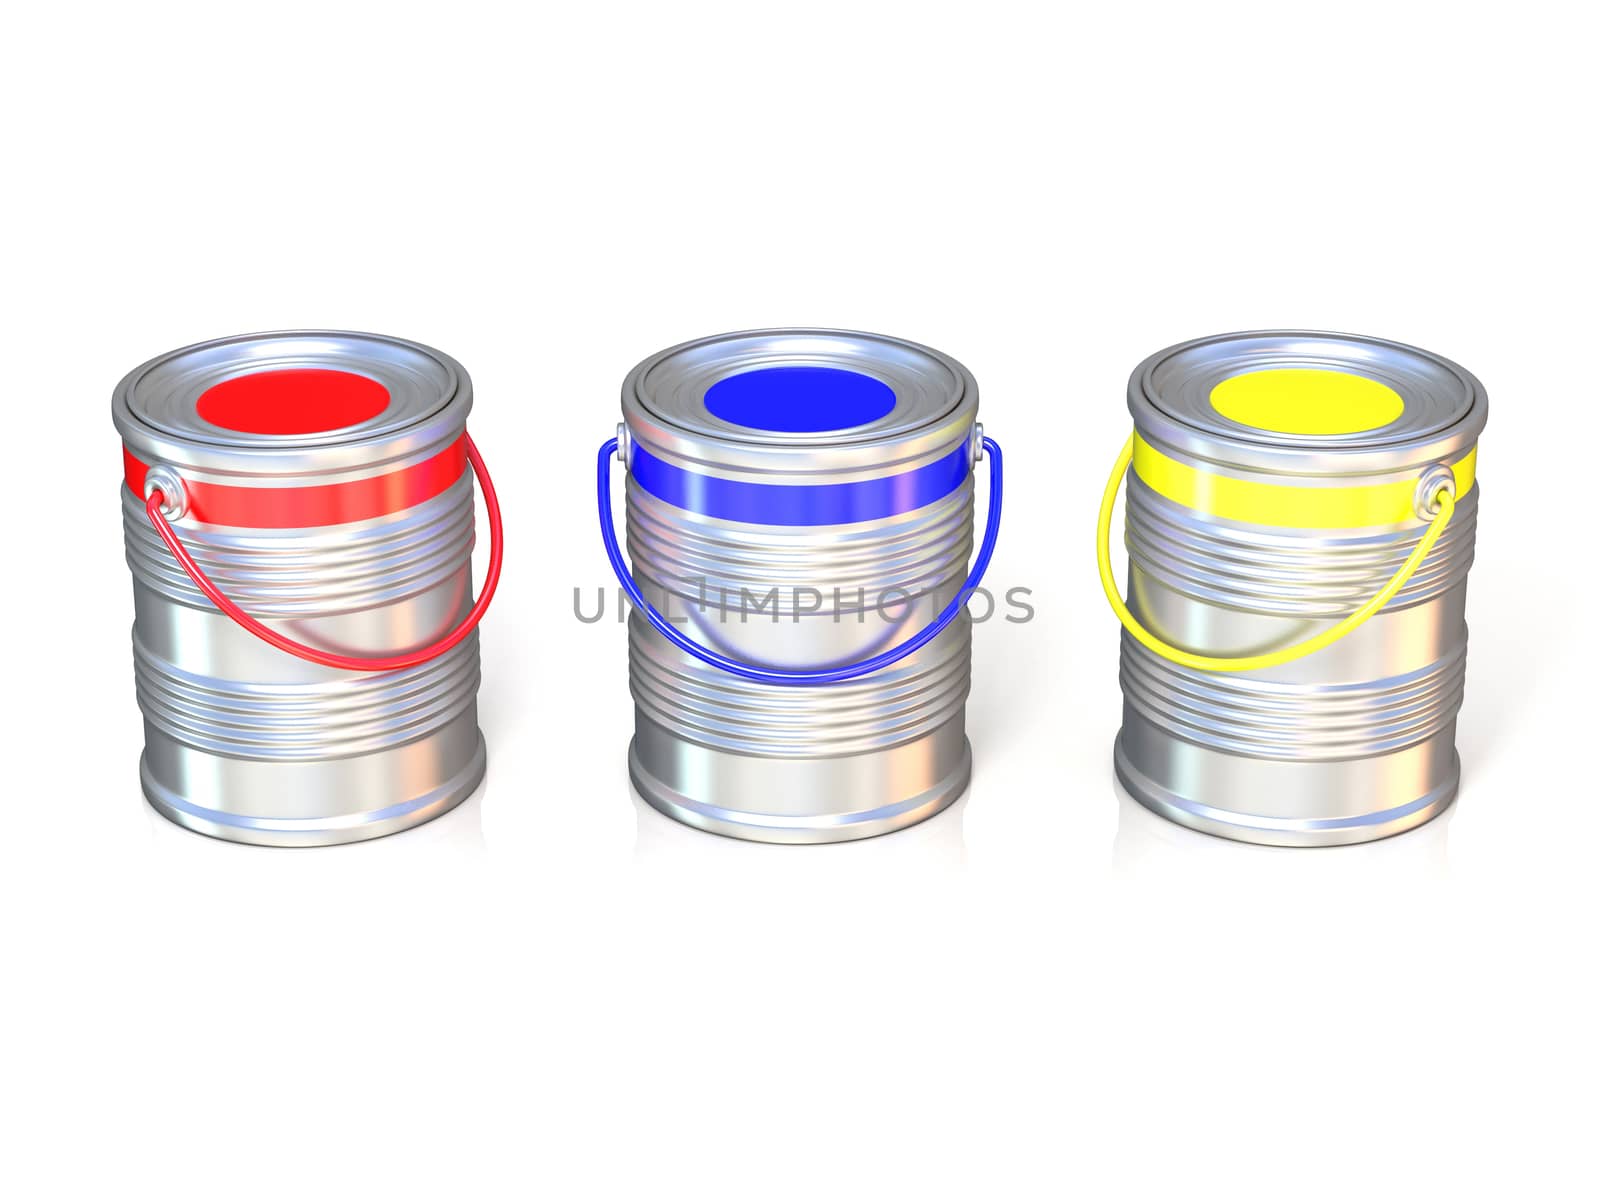 Metal tin cans with basic colors (red, blue and green) paint by djmilic